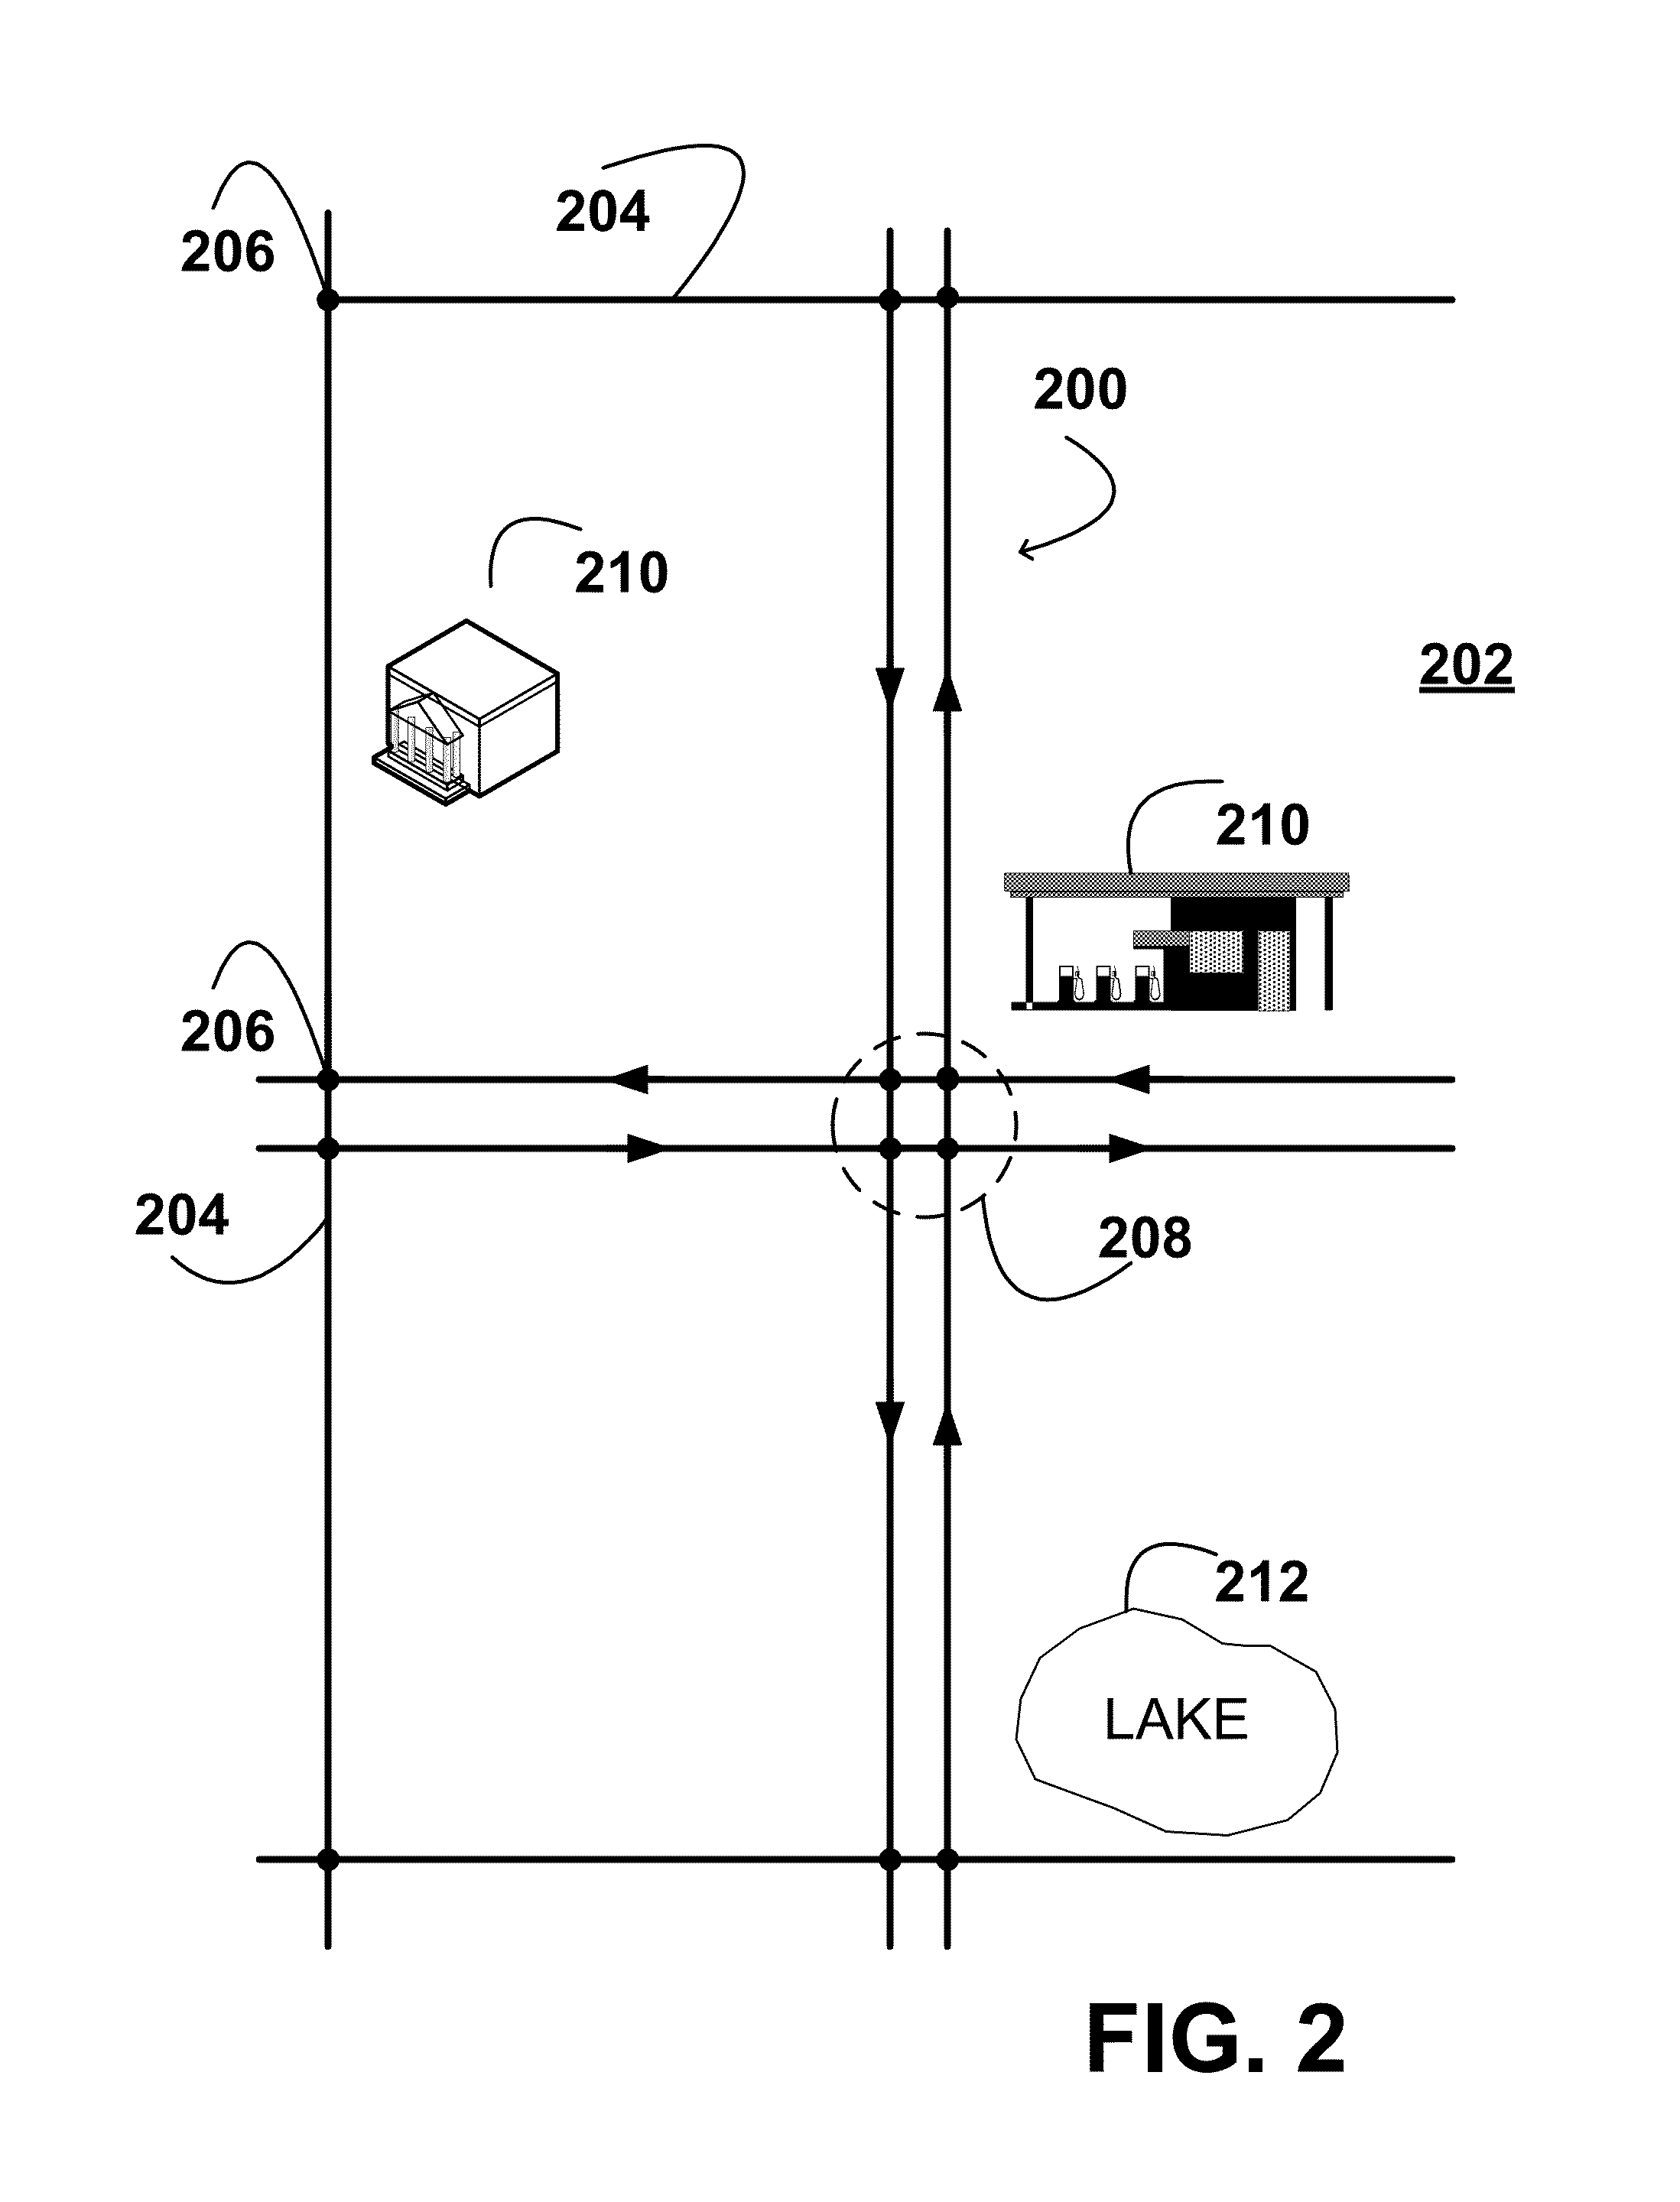 Method of operating a navigation system to provide route guidance